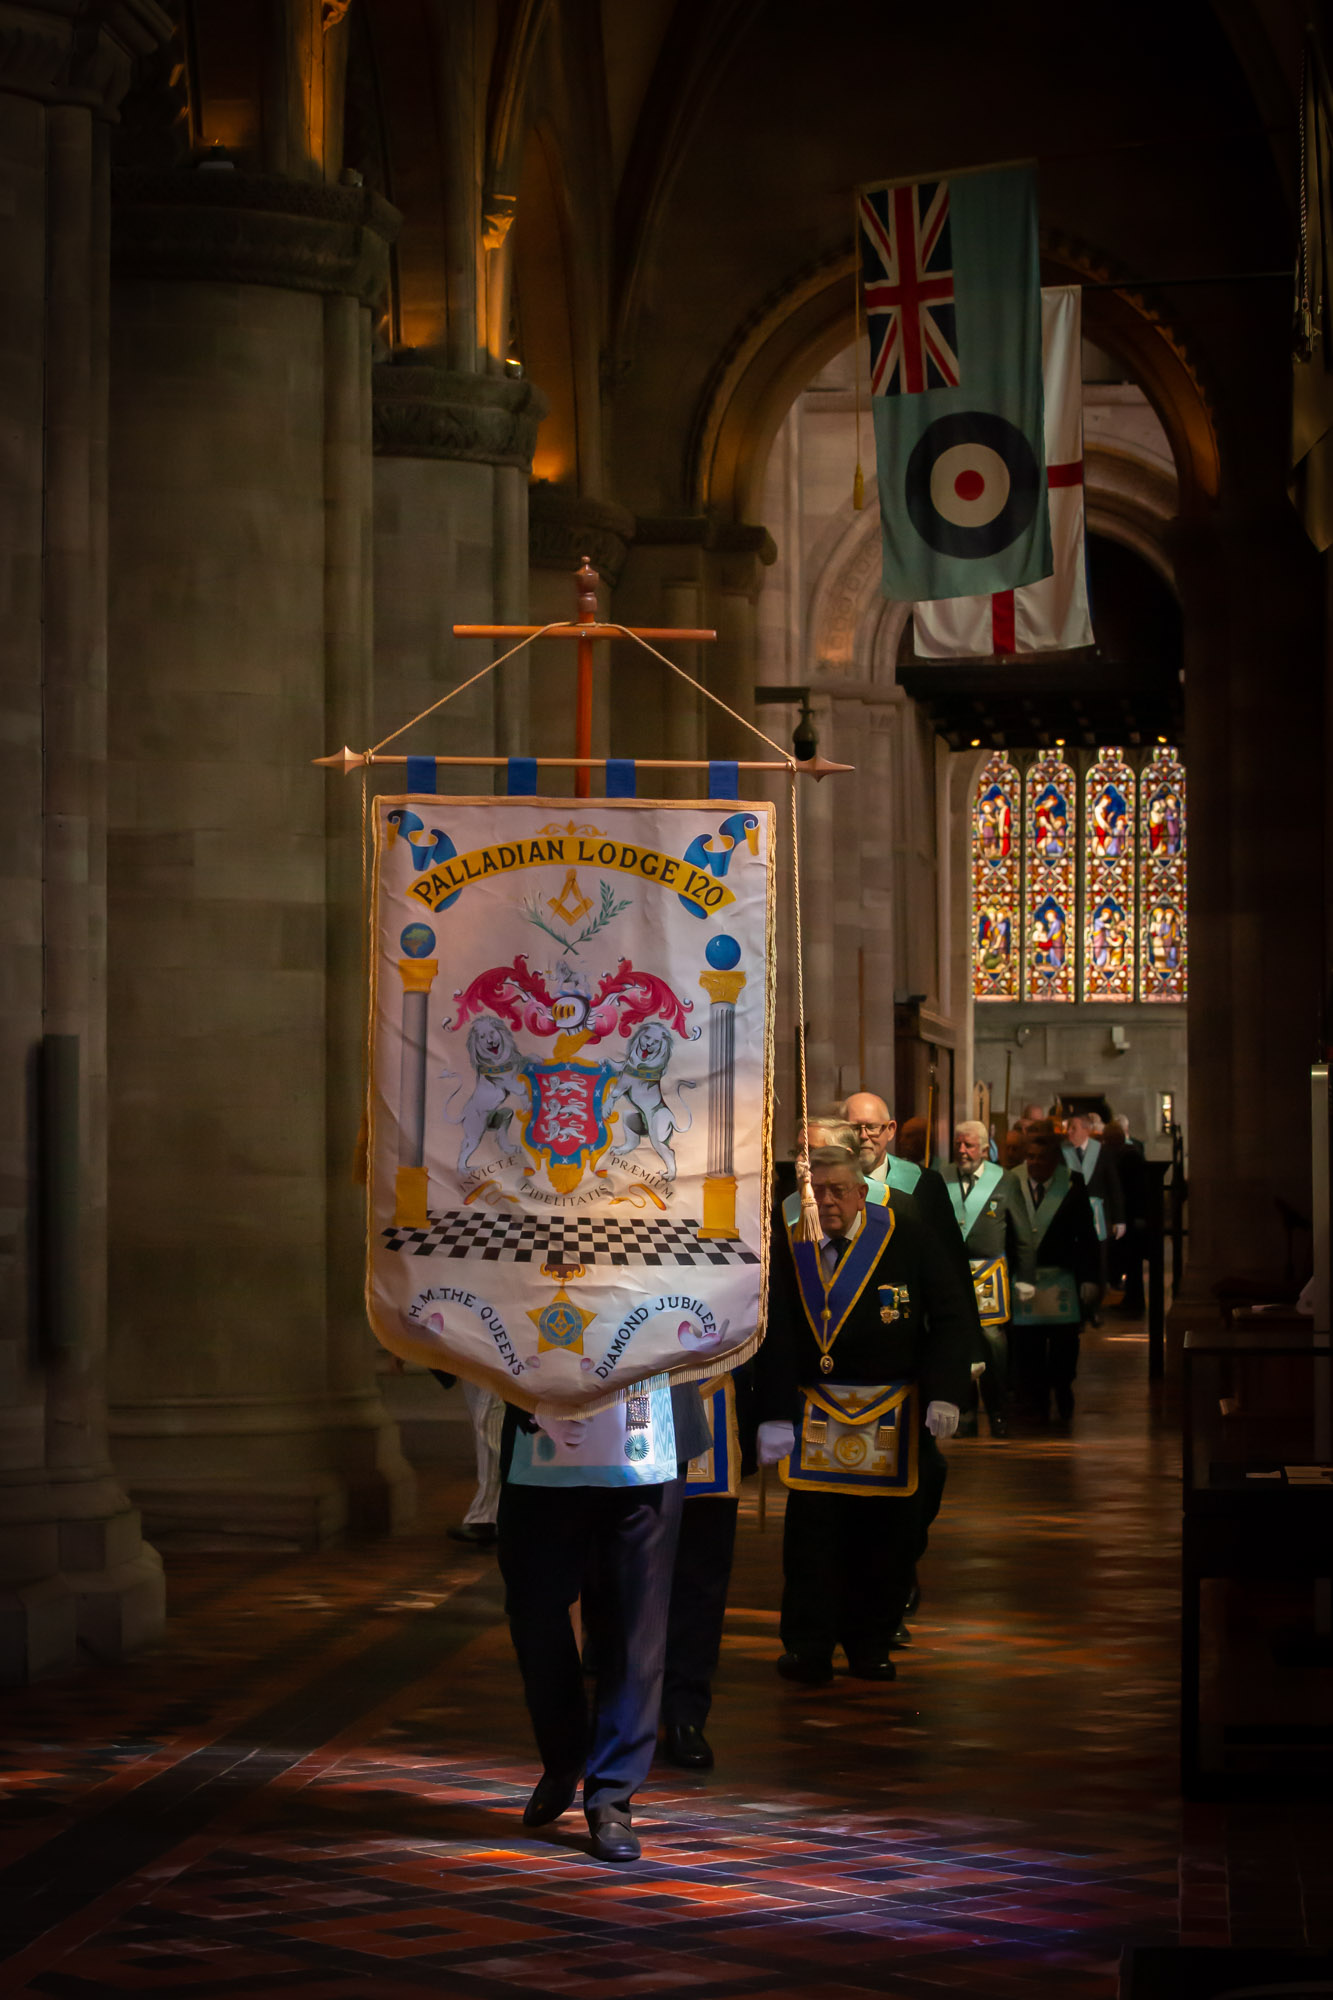 The Standard Bearer of Palladian Lodge leading the procession into the Cathedral service